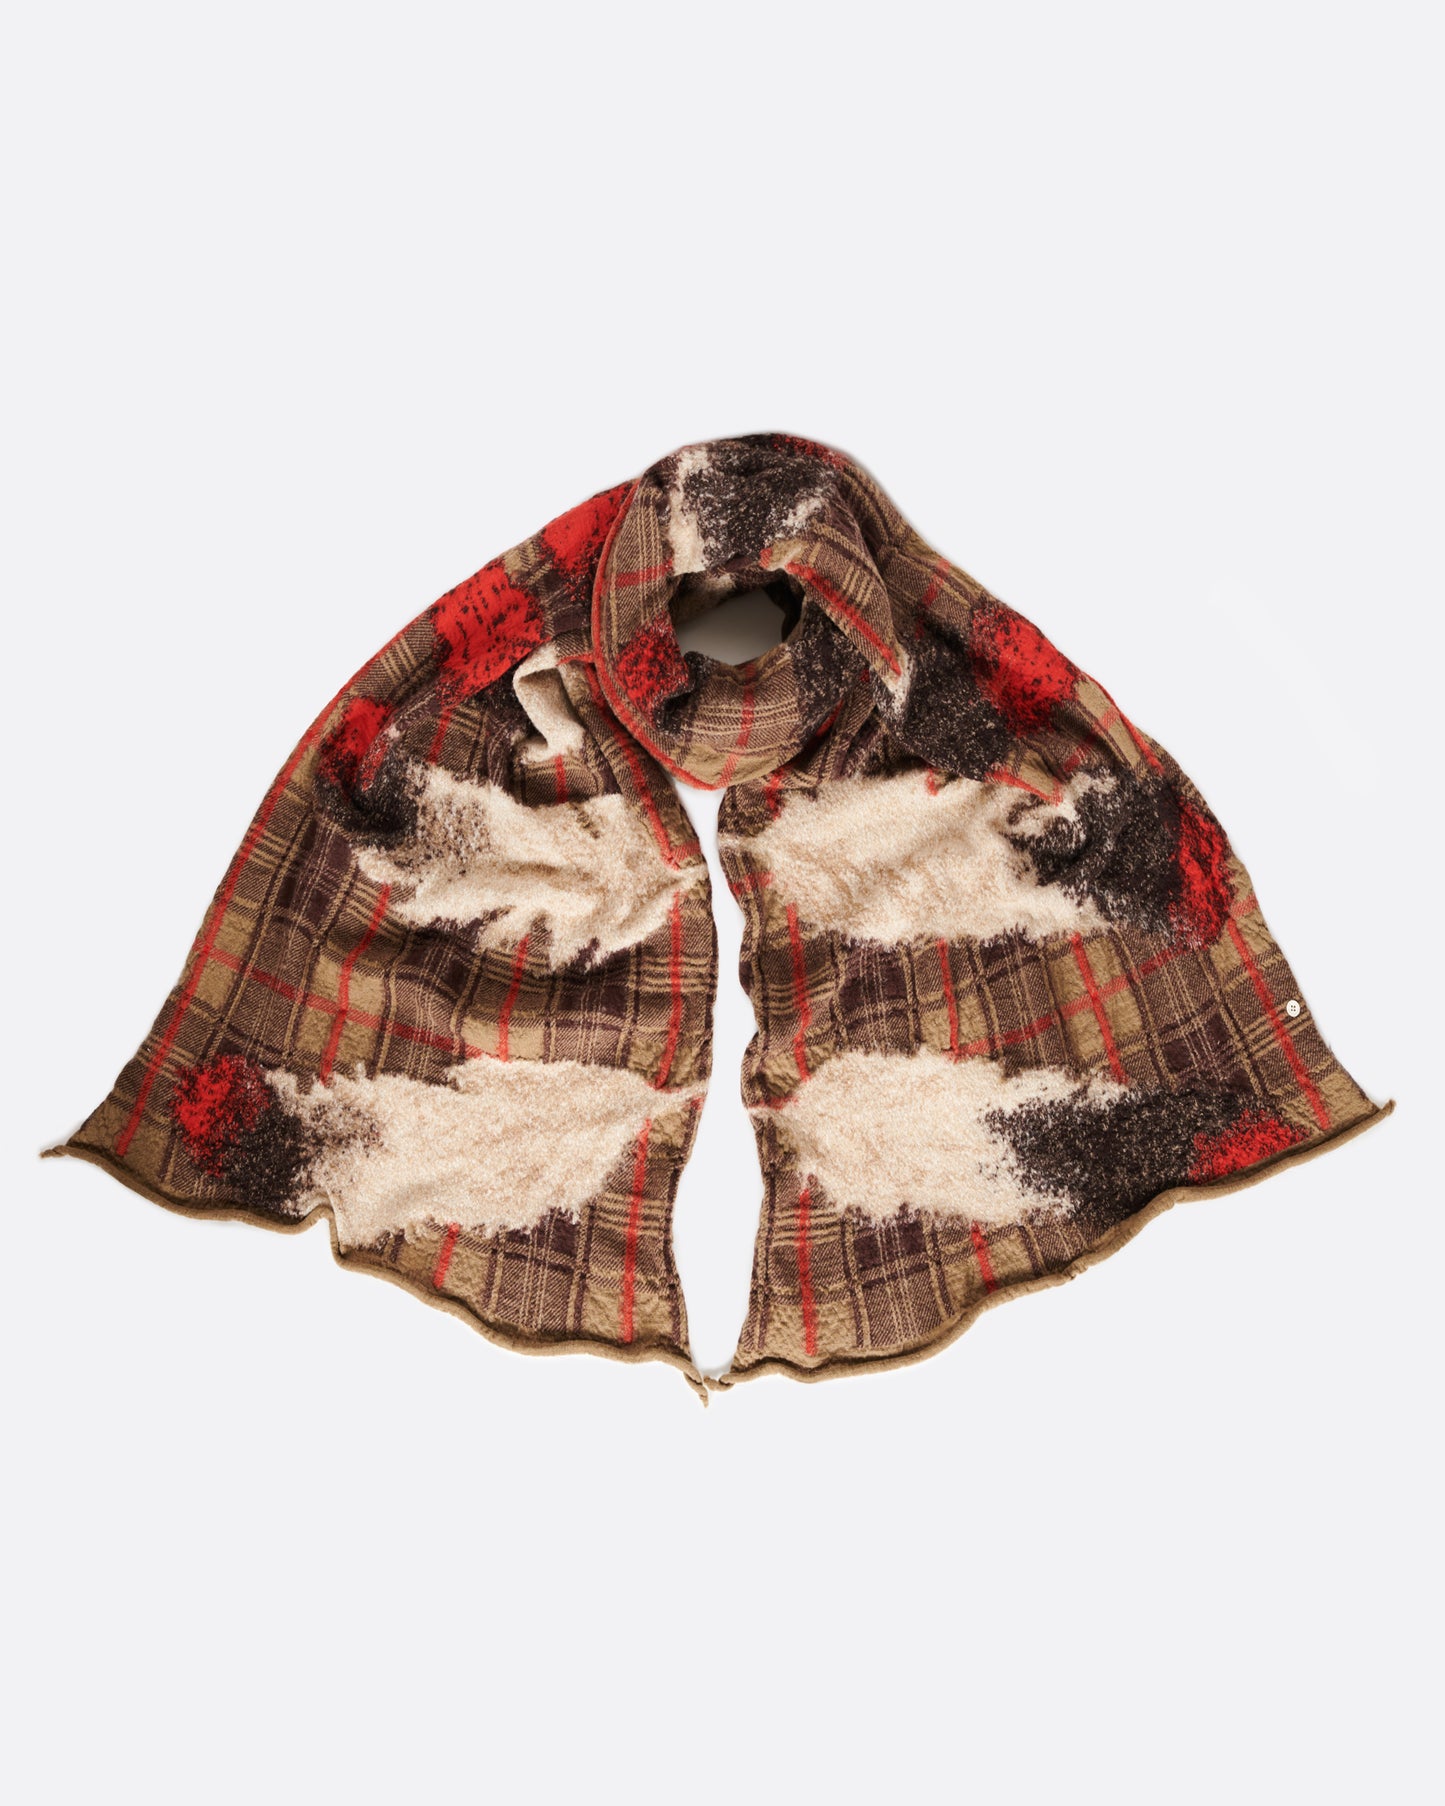 This scarf combines traditional Scottish tartan with long, majestic feathers.